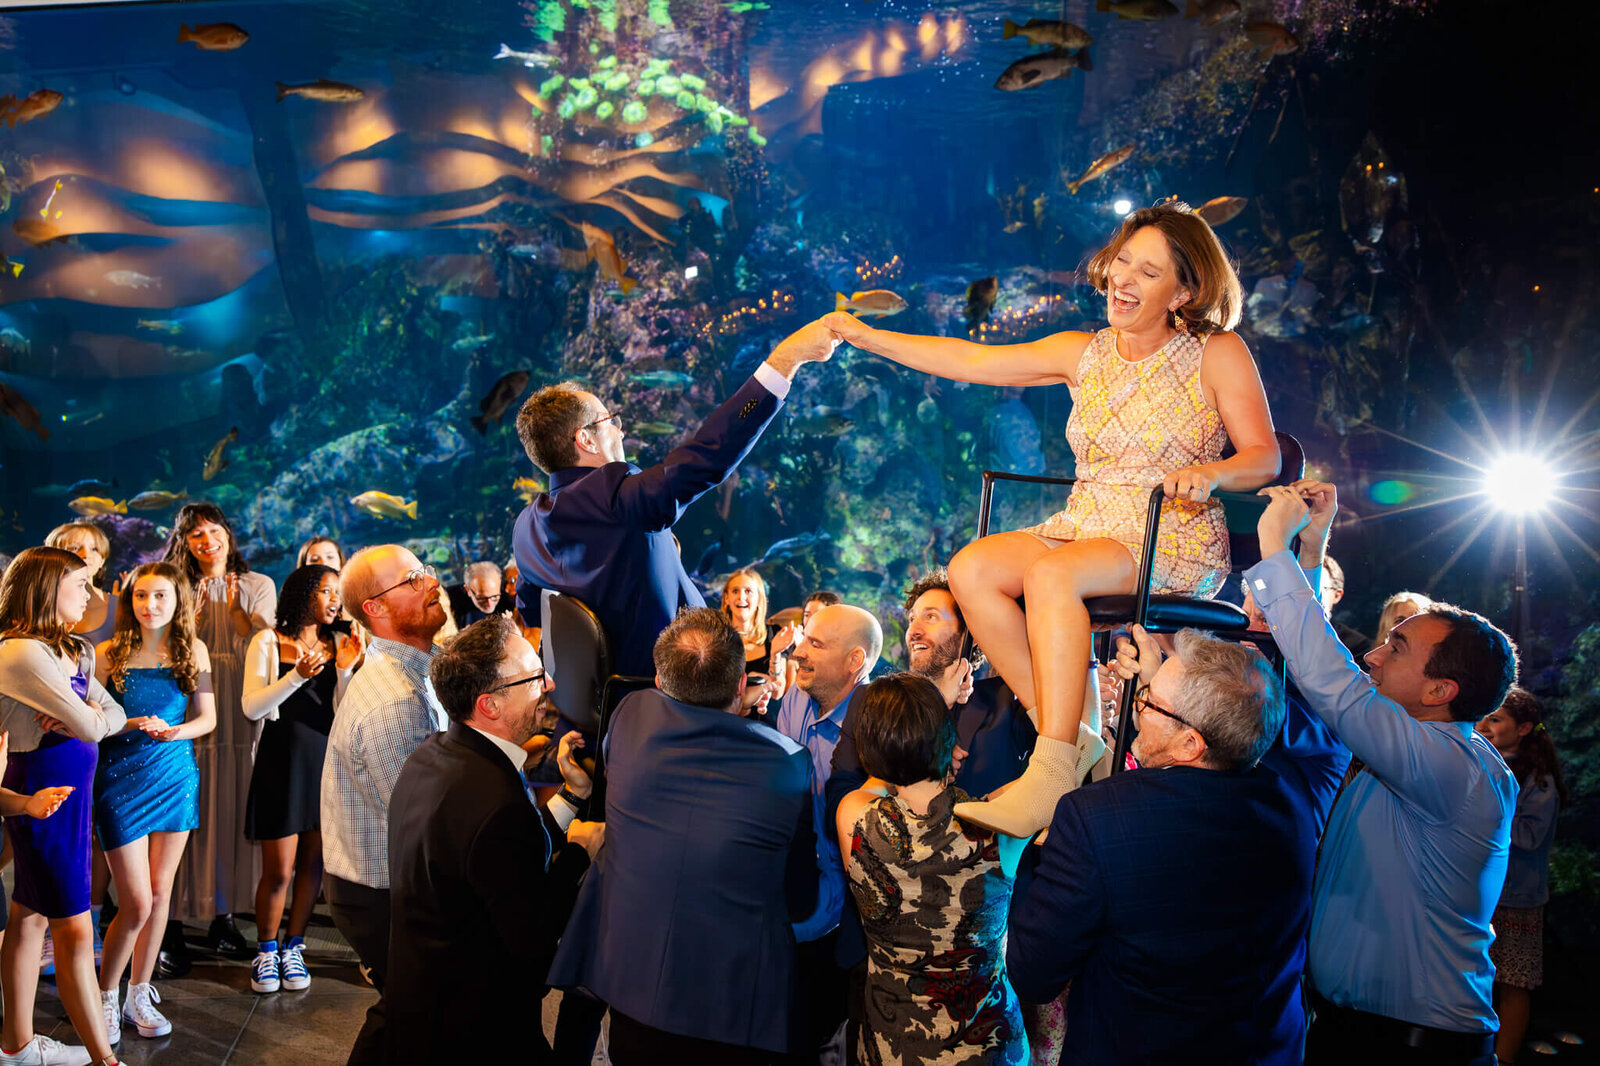 A happy woman lifted in a chair celebrates on the dance floor with her teen son in an aquarium.